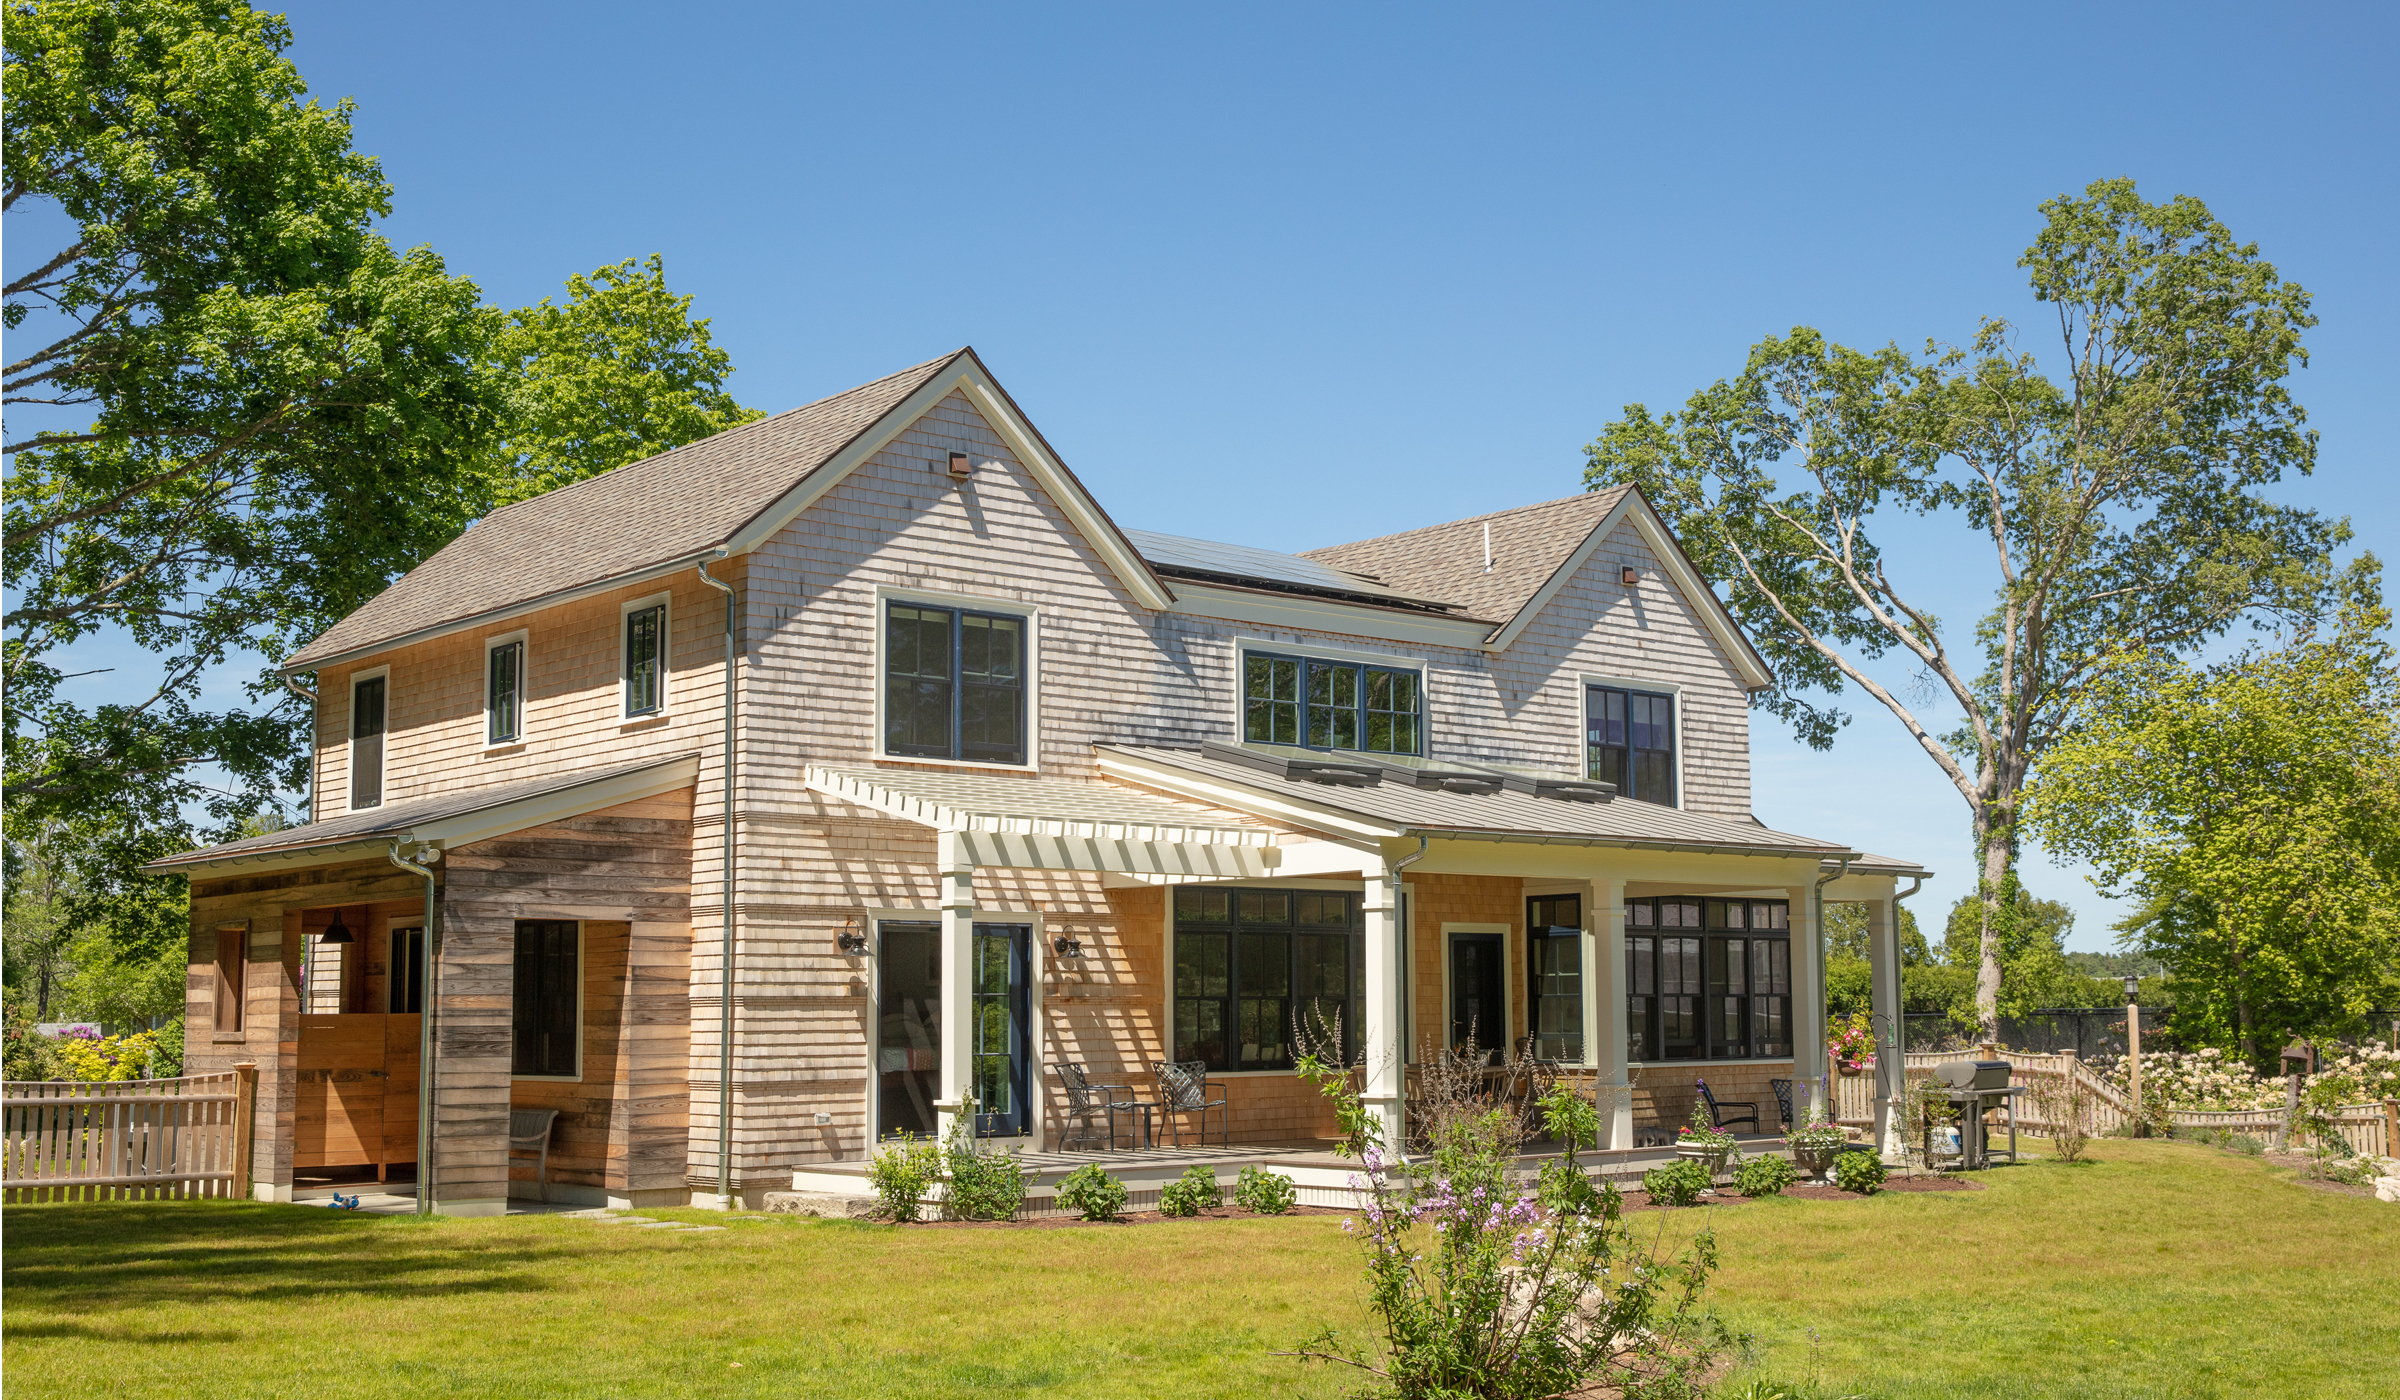 New cottage style home with covered porch on Cape Cod